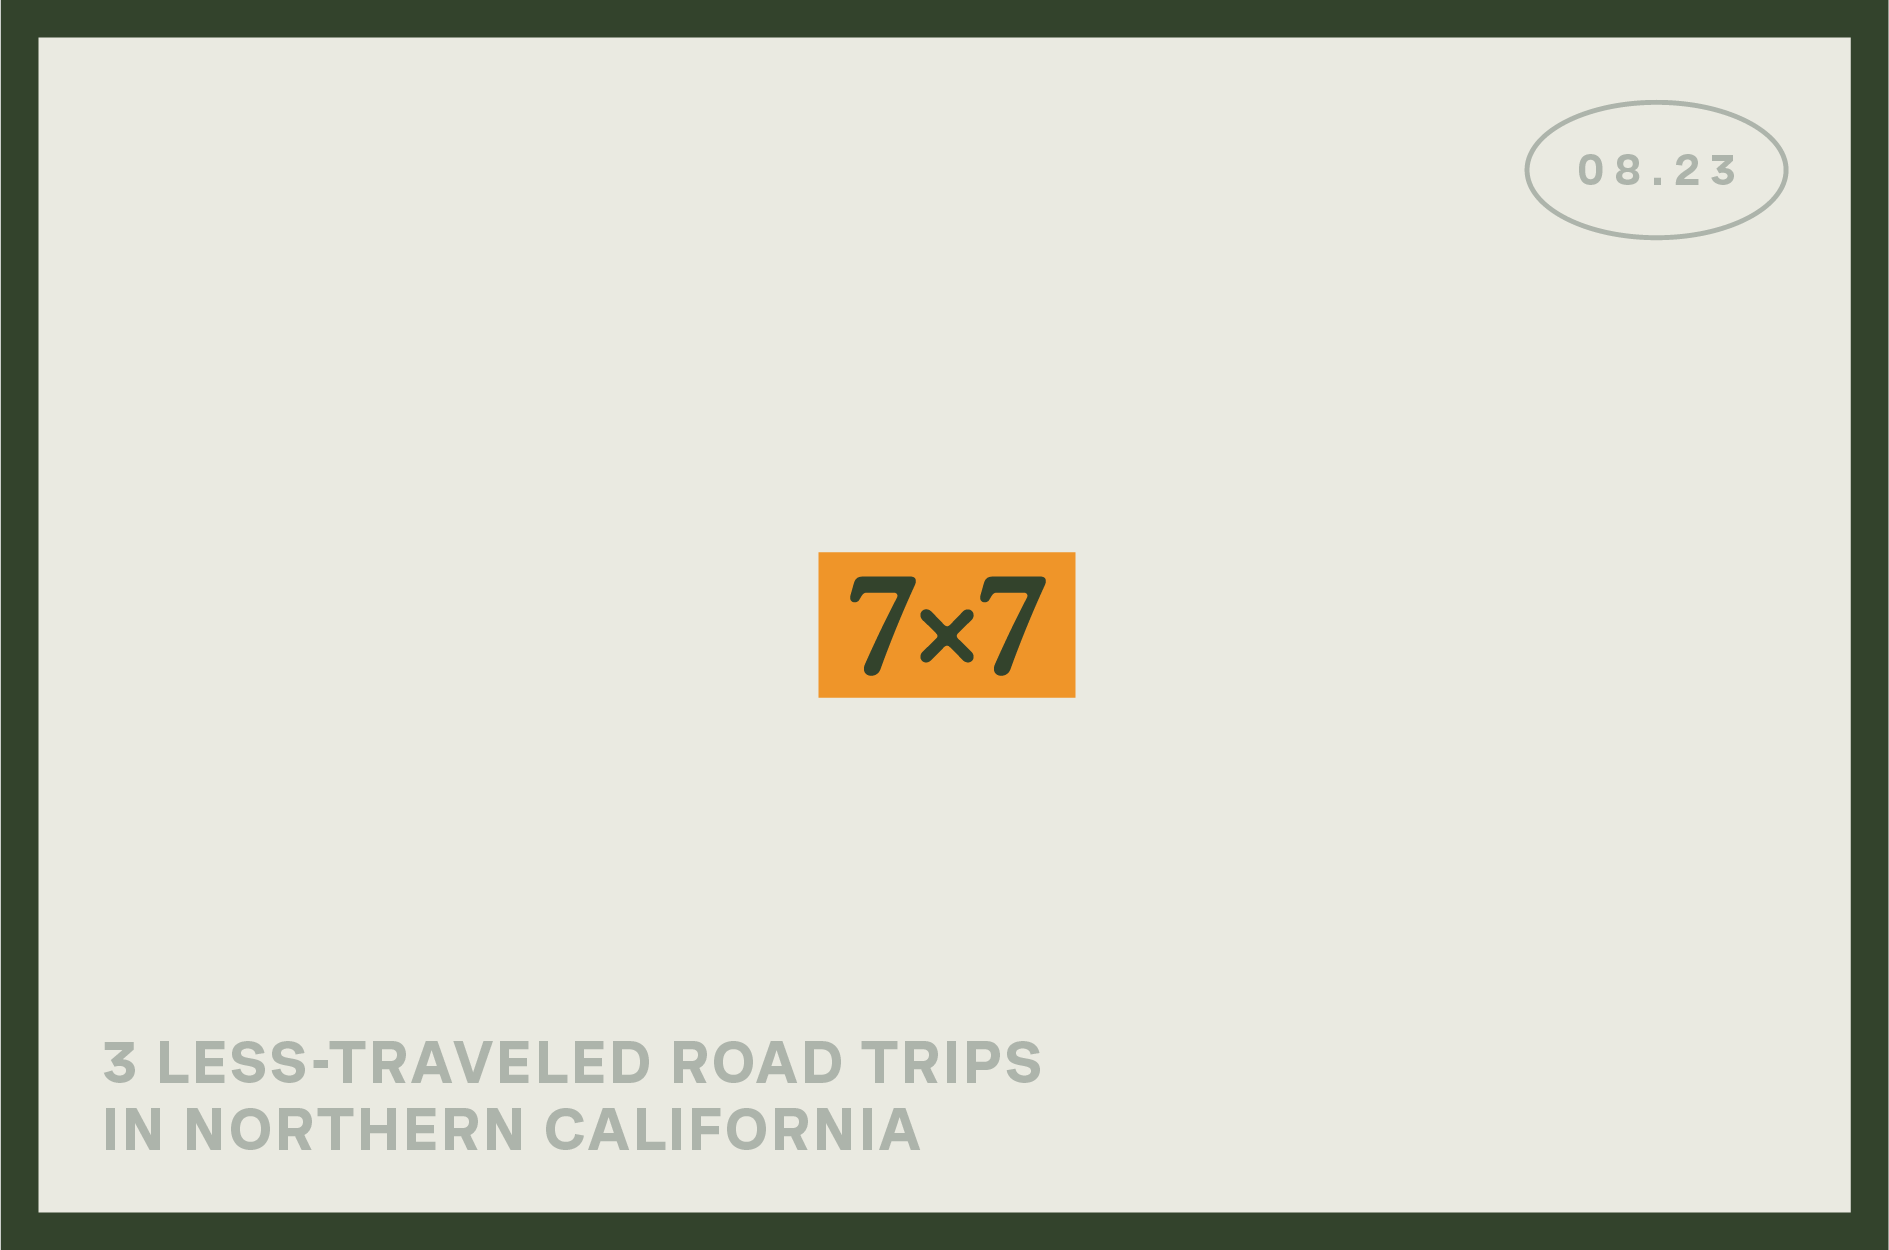 "7x7" banner featuring "3 Less-traveled road trips in Northern California" offers enticing travel options.